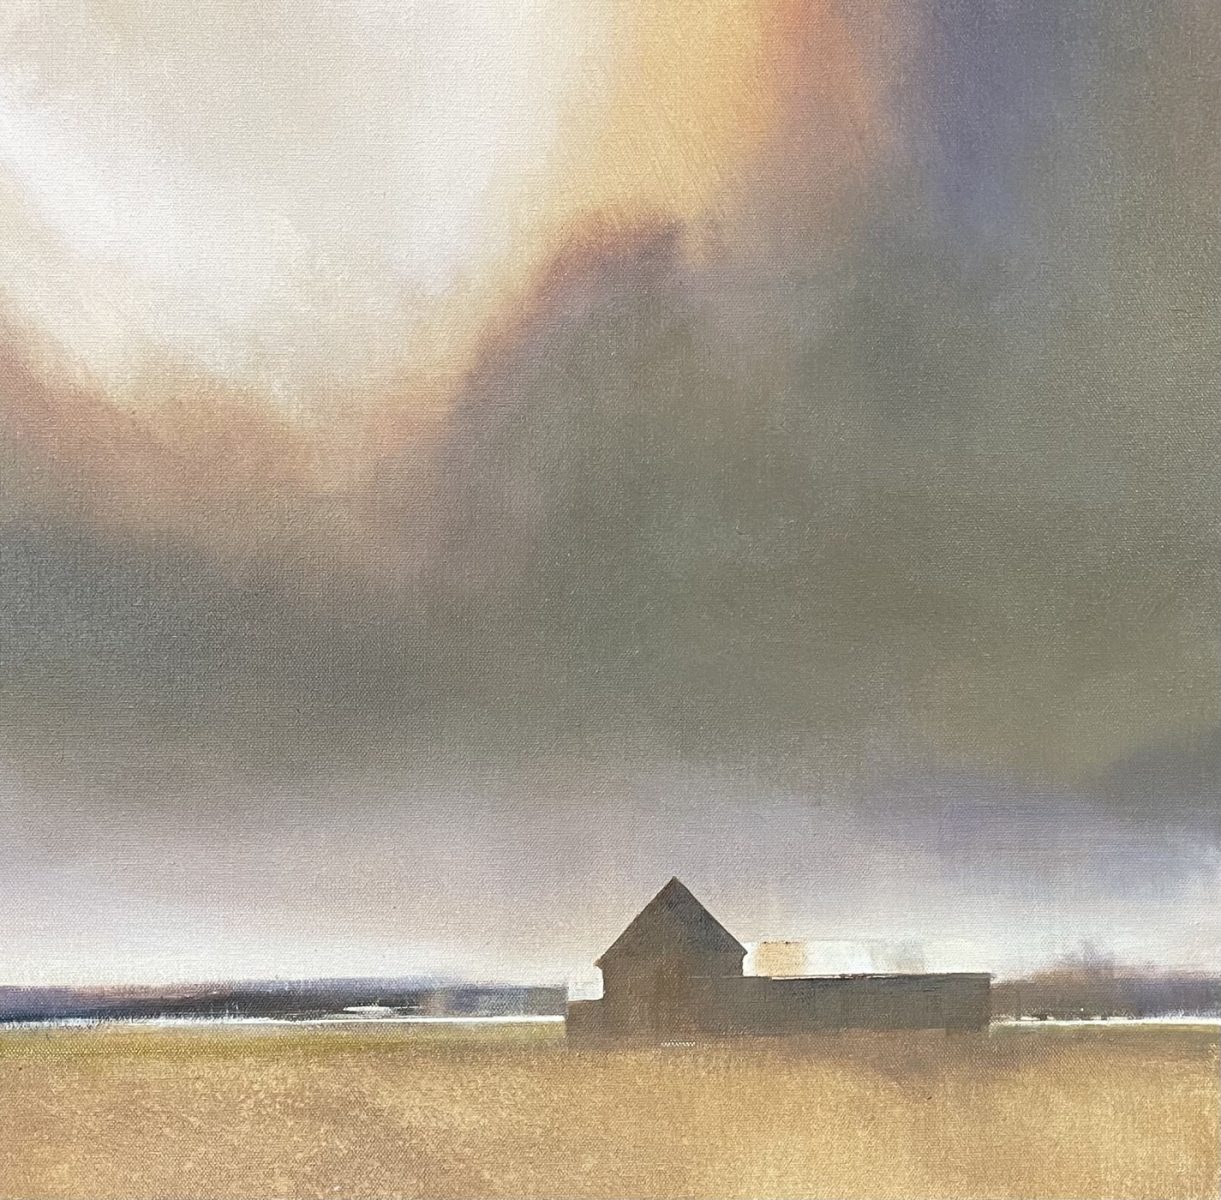 Oil painting of house in field by Charlie Hunter